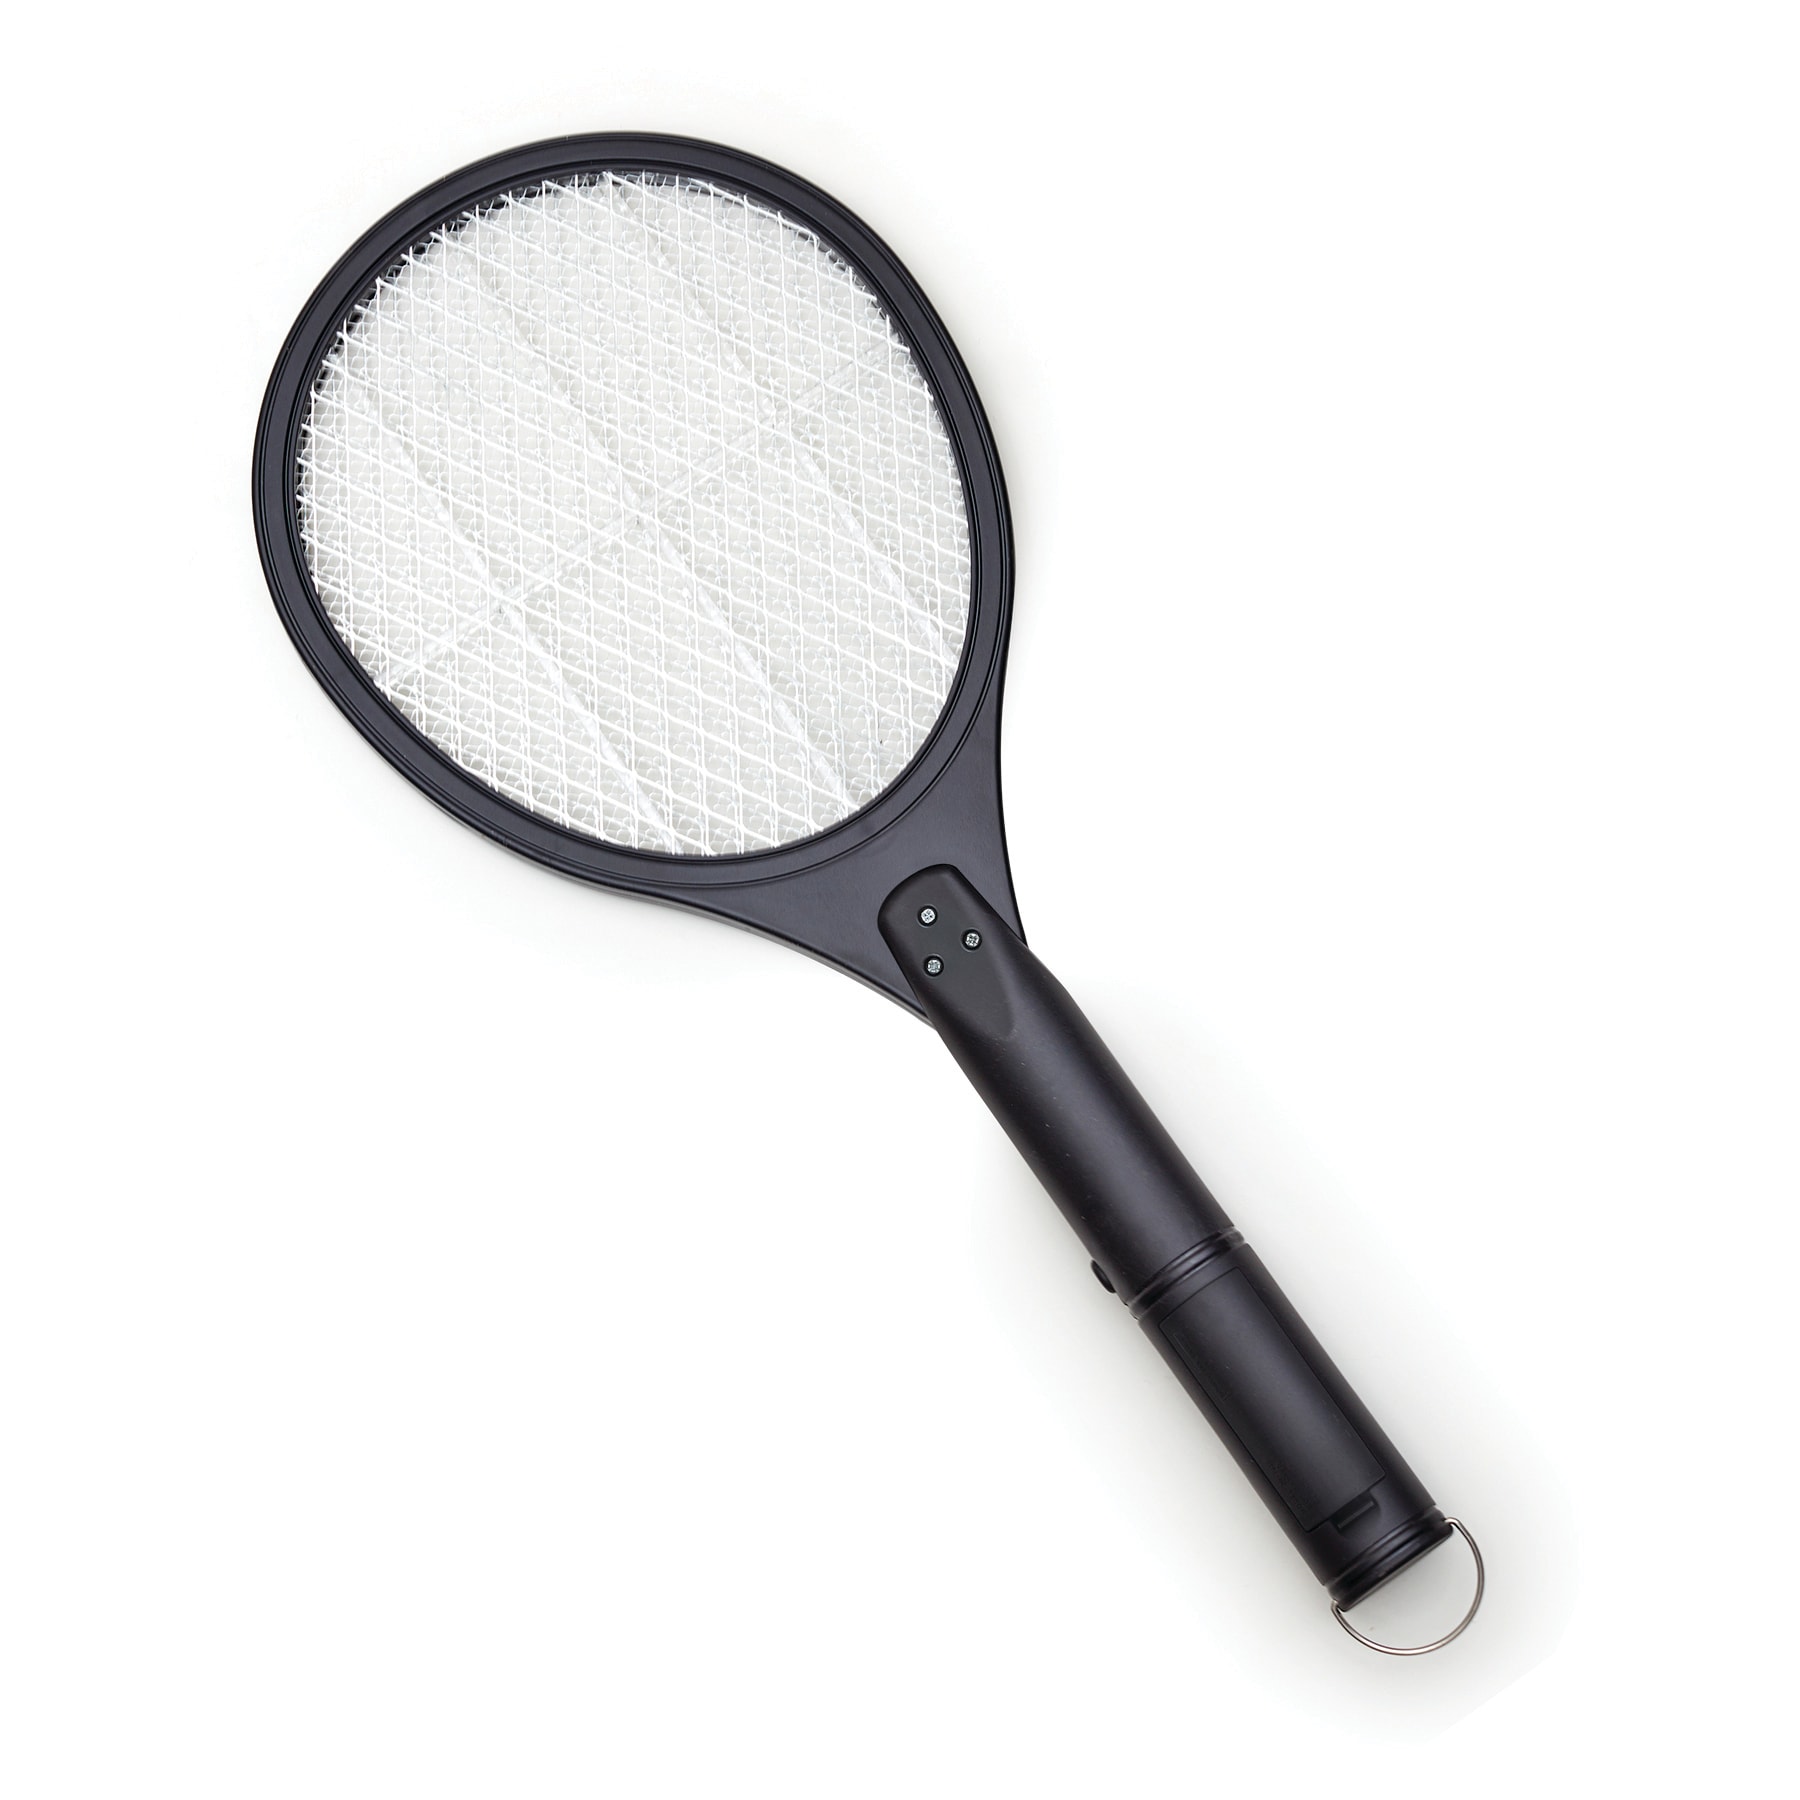  BLACK+DECKER Electric Fly Swatter- Fly Zapper- Tennis Bug  Zapper Racket- Battery Powered Zapper- Electric Mosquito Swatter- Handheld  Indoor & Outdoor- Non Toxic, Safe for Humans & Pets : Patio, Lawn